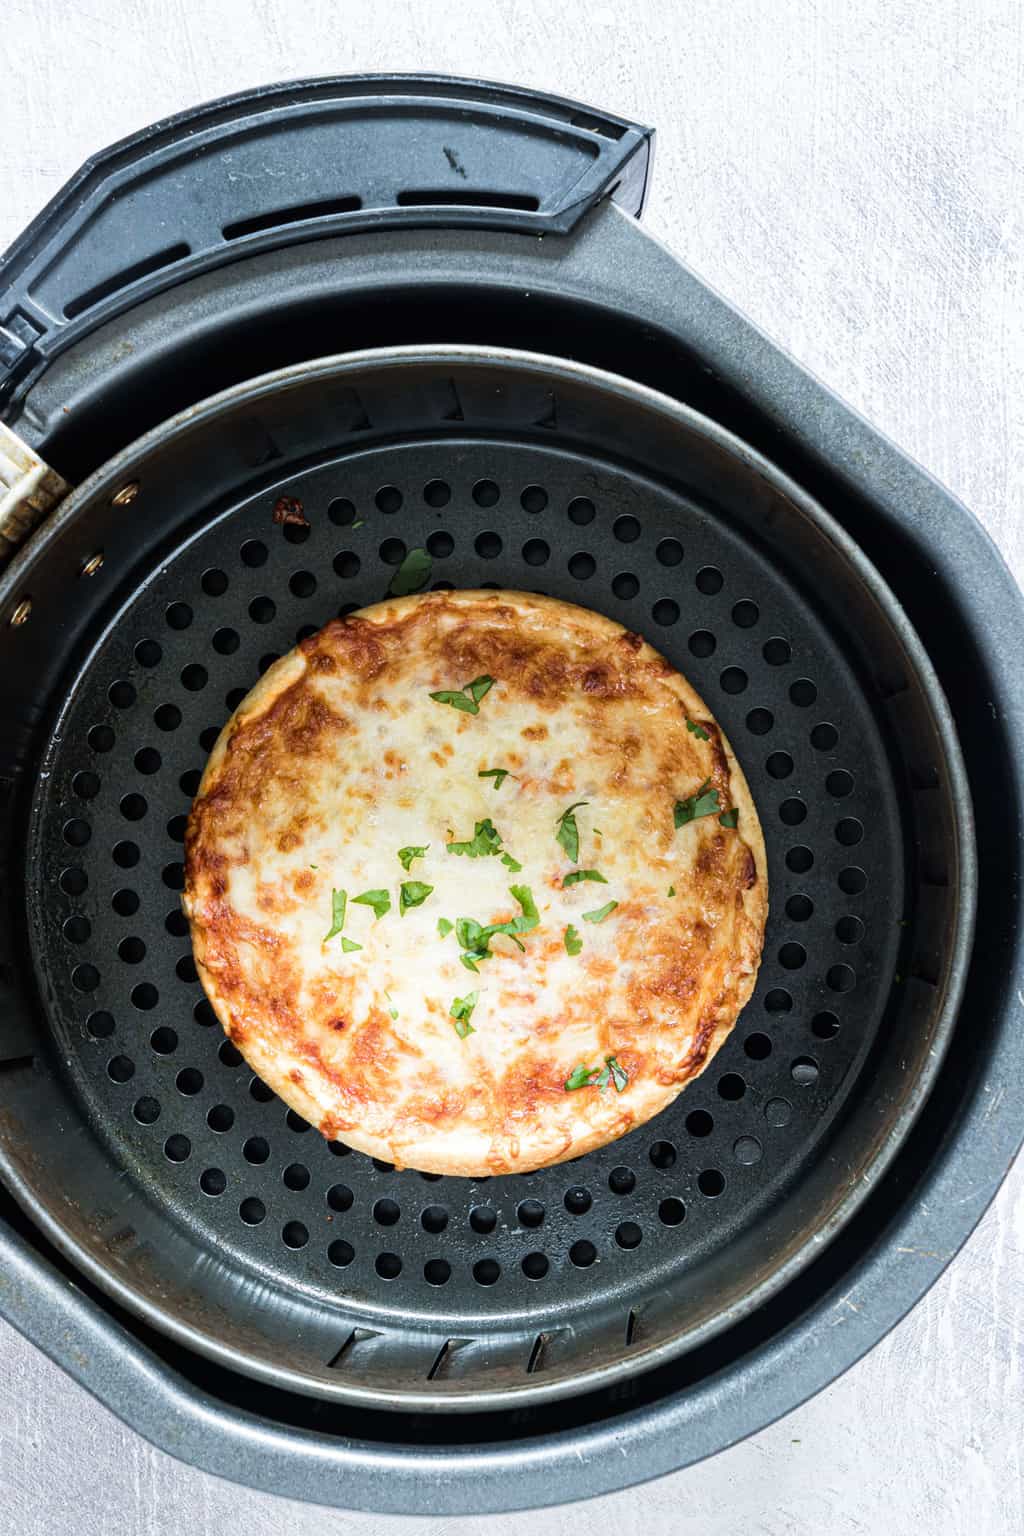 the cooked frozen pizza inside the air fryer basket